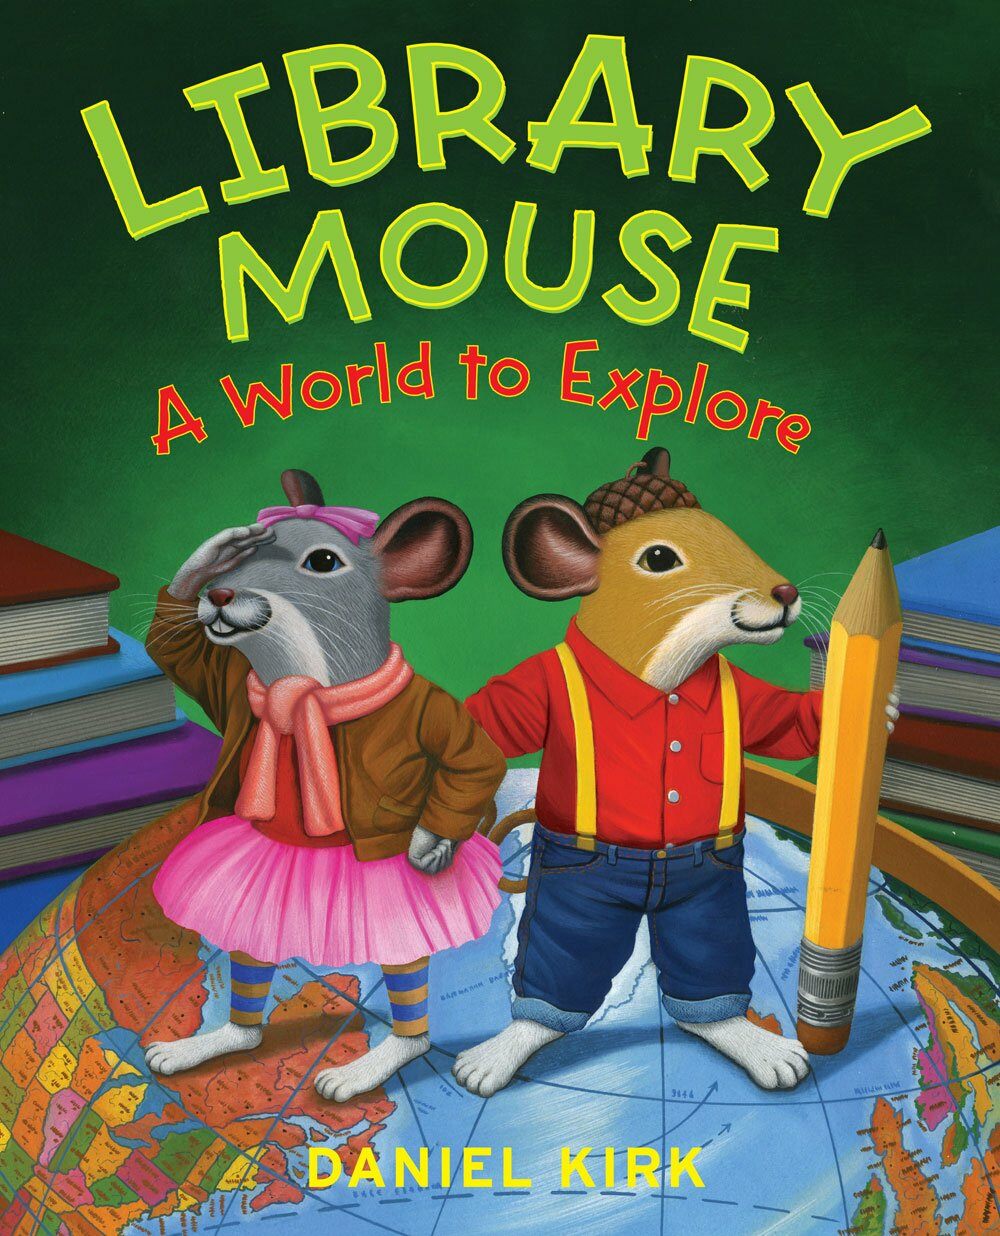 Library Mouse: A World to Explore (Hardcover)